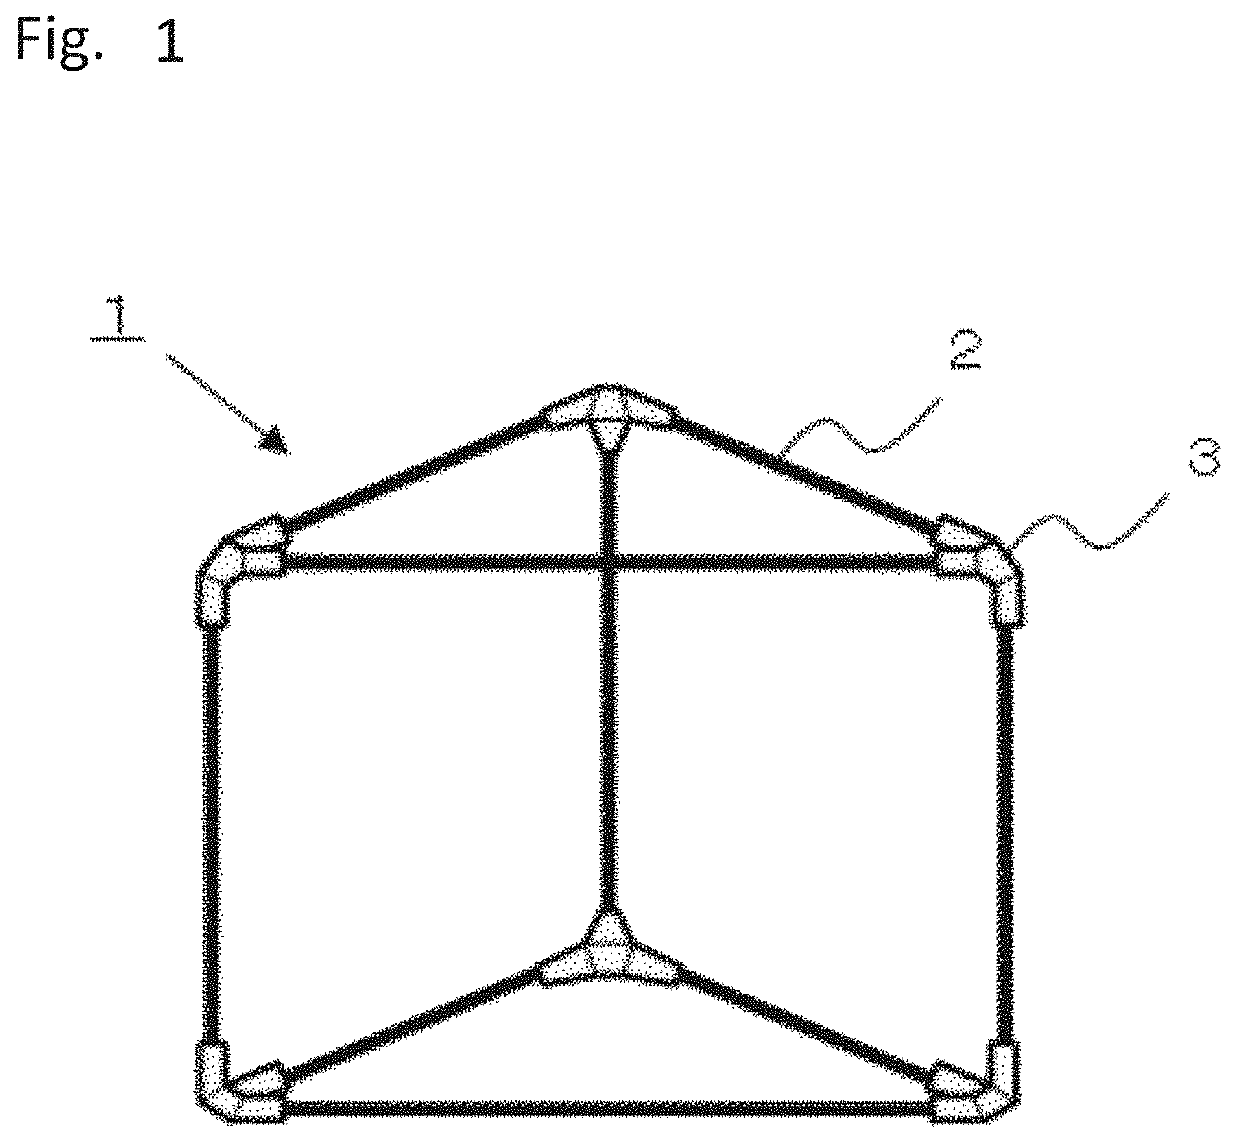 Pipe structure, truss structure, and artificial satellite using the same